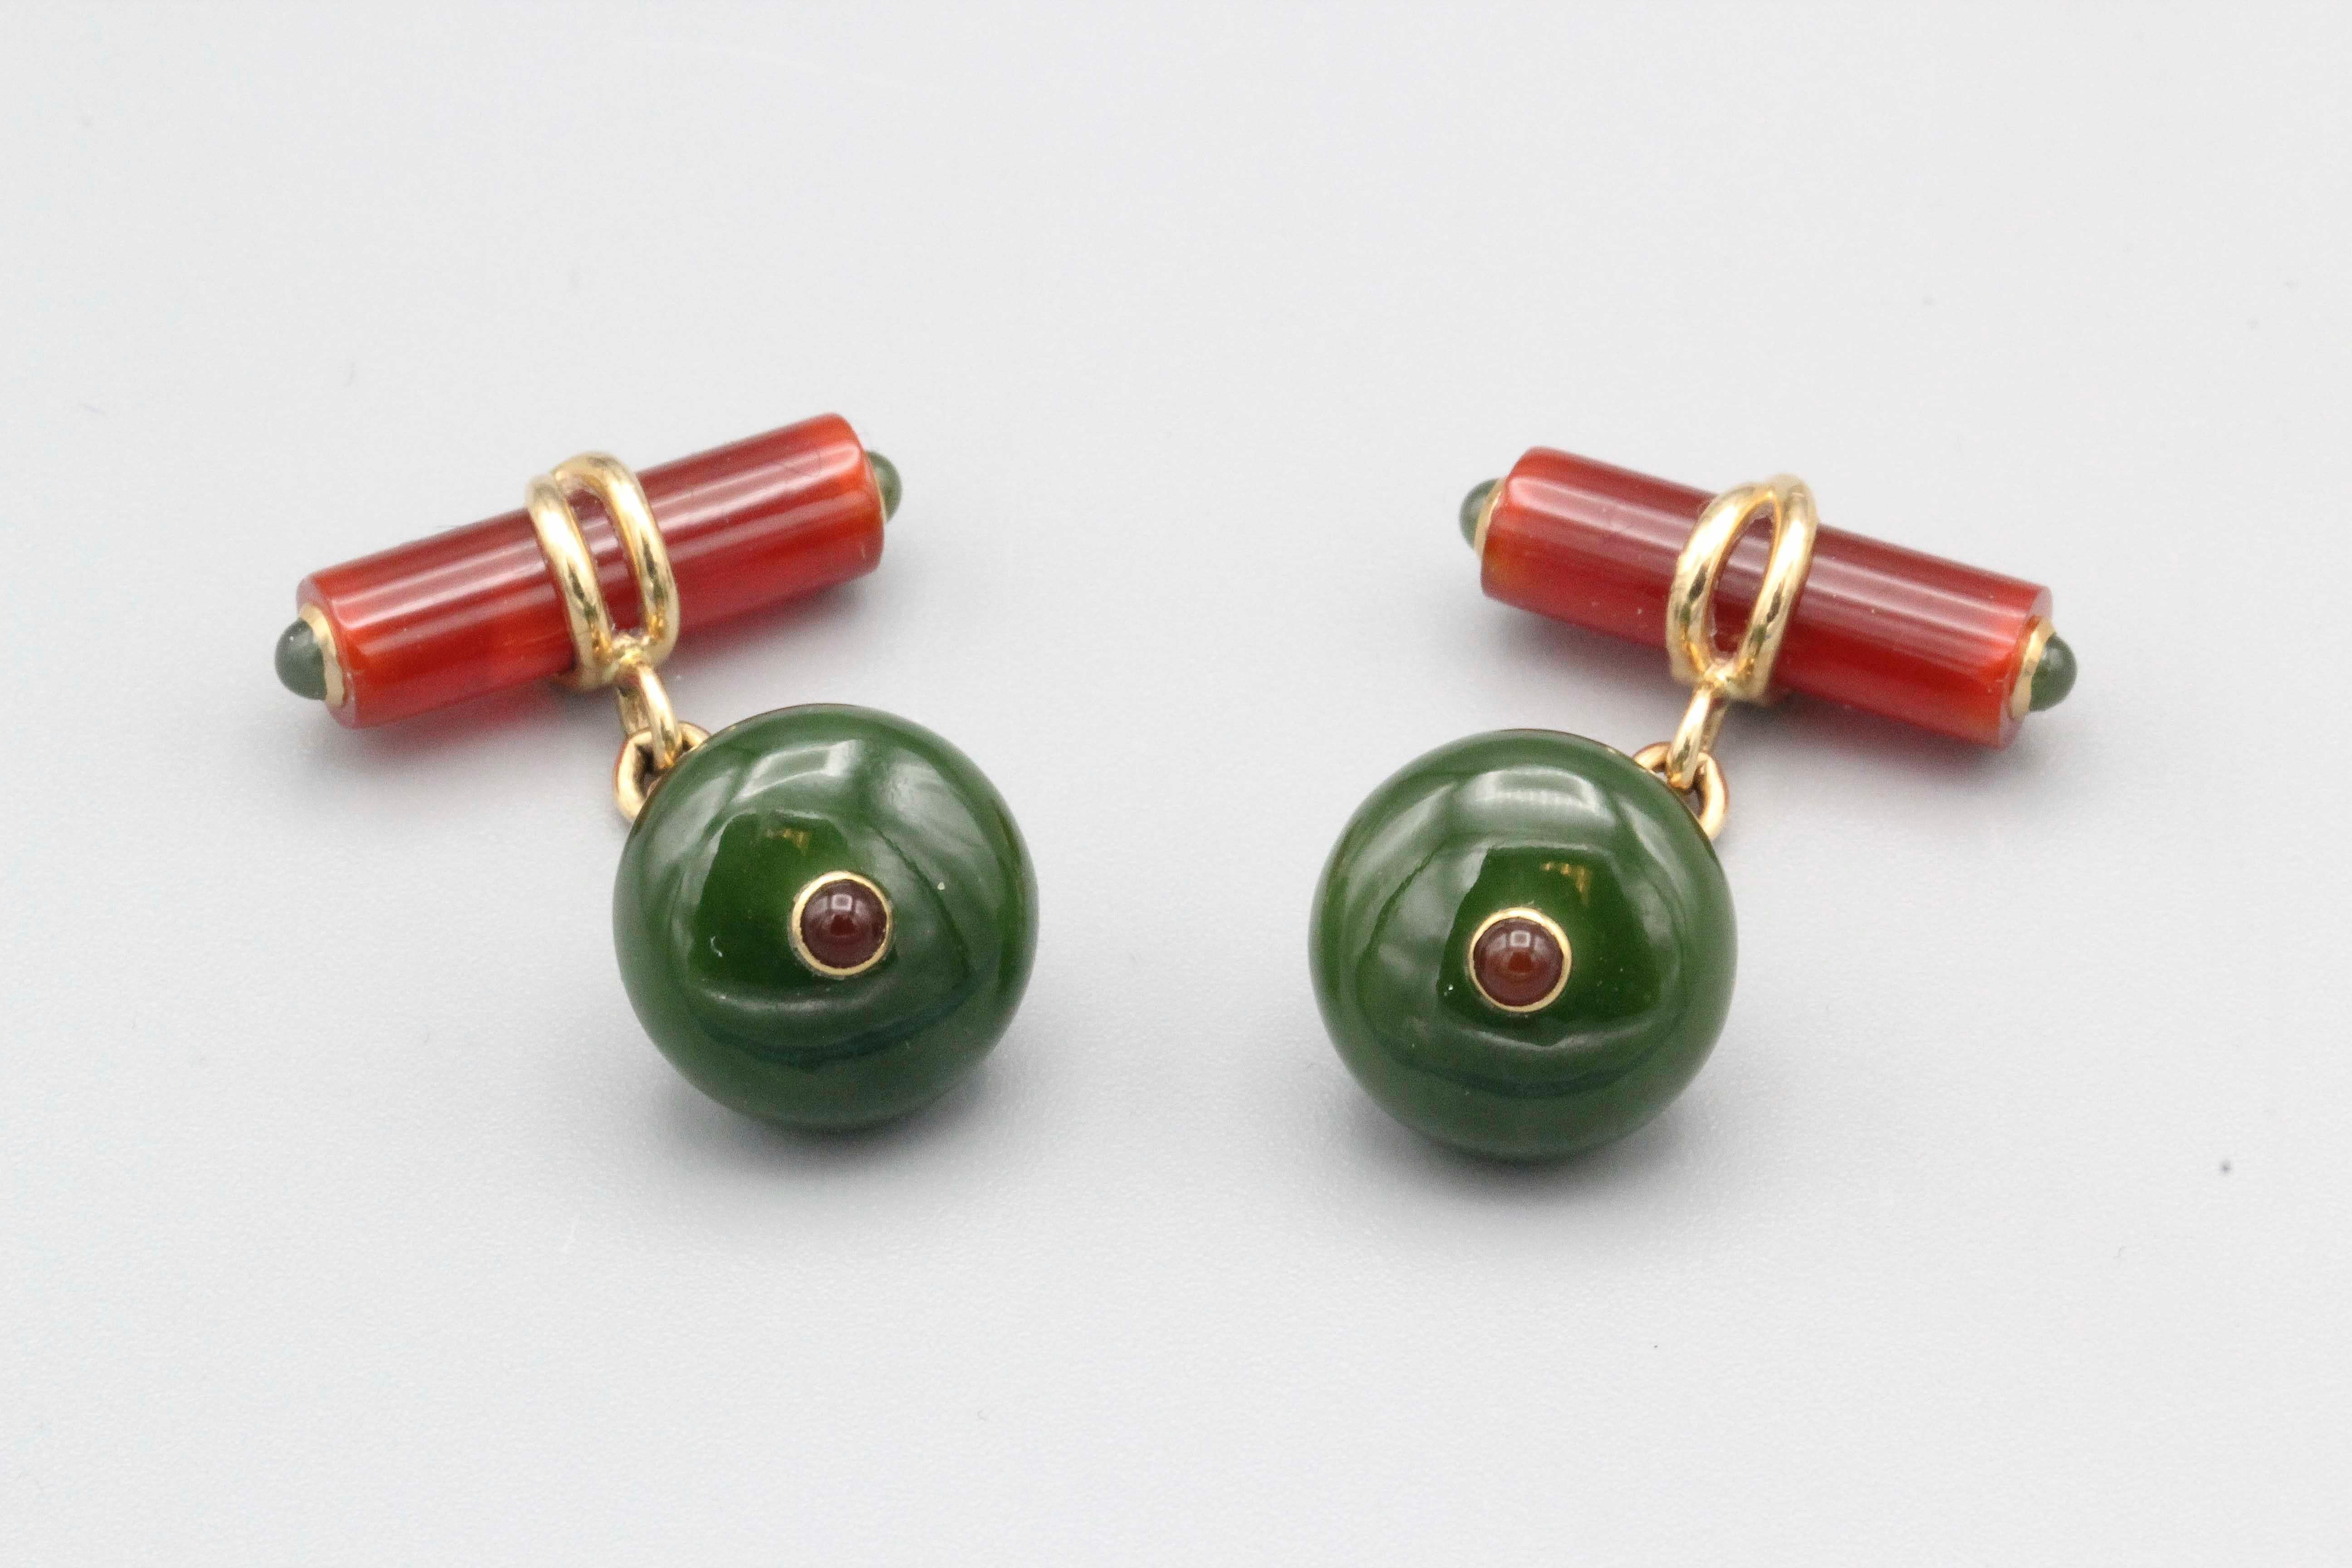 Fine pair of  nephrite jade, carnelian,  and 18K yellow gold cufflinks by Trianon, a company of Seaman Schepps. Well crafted and vibrant, would make a handsome gift for that special someone. 

Hallmarks: Trianon, 14k.